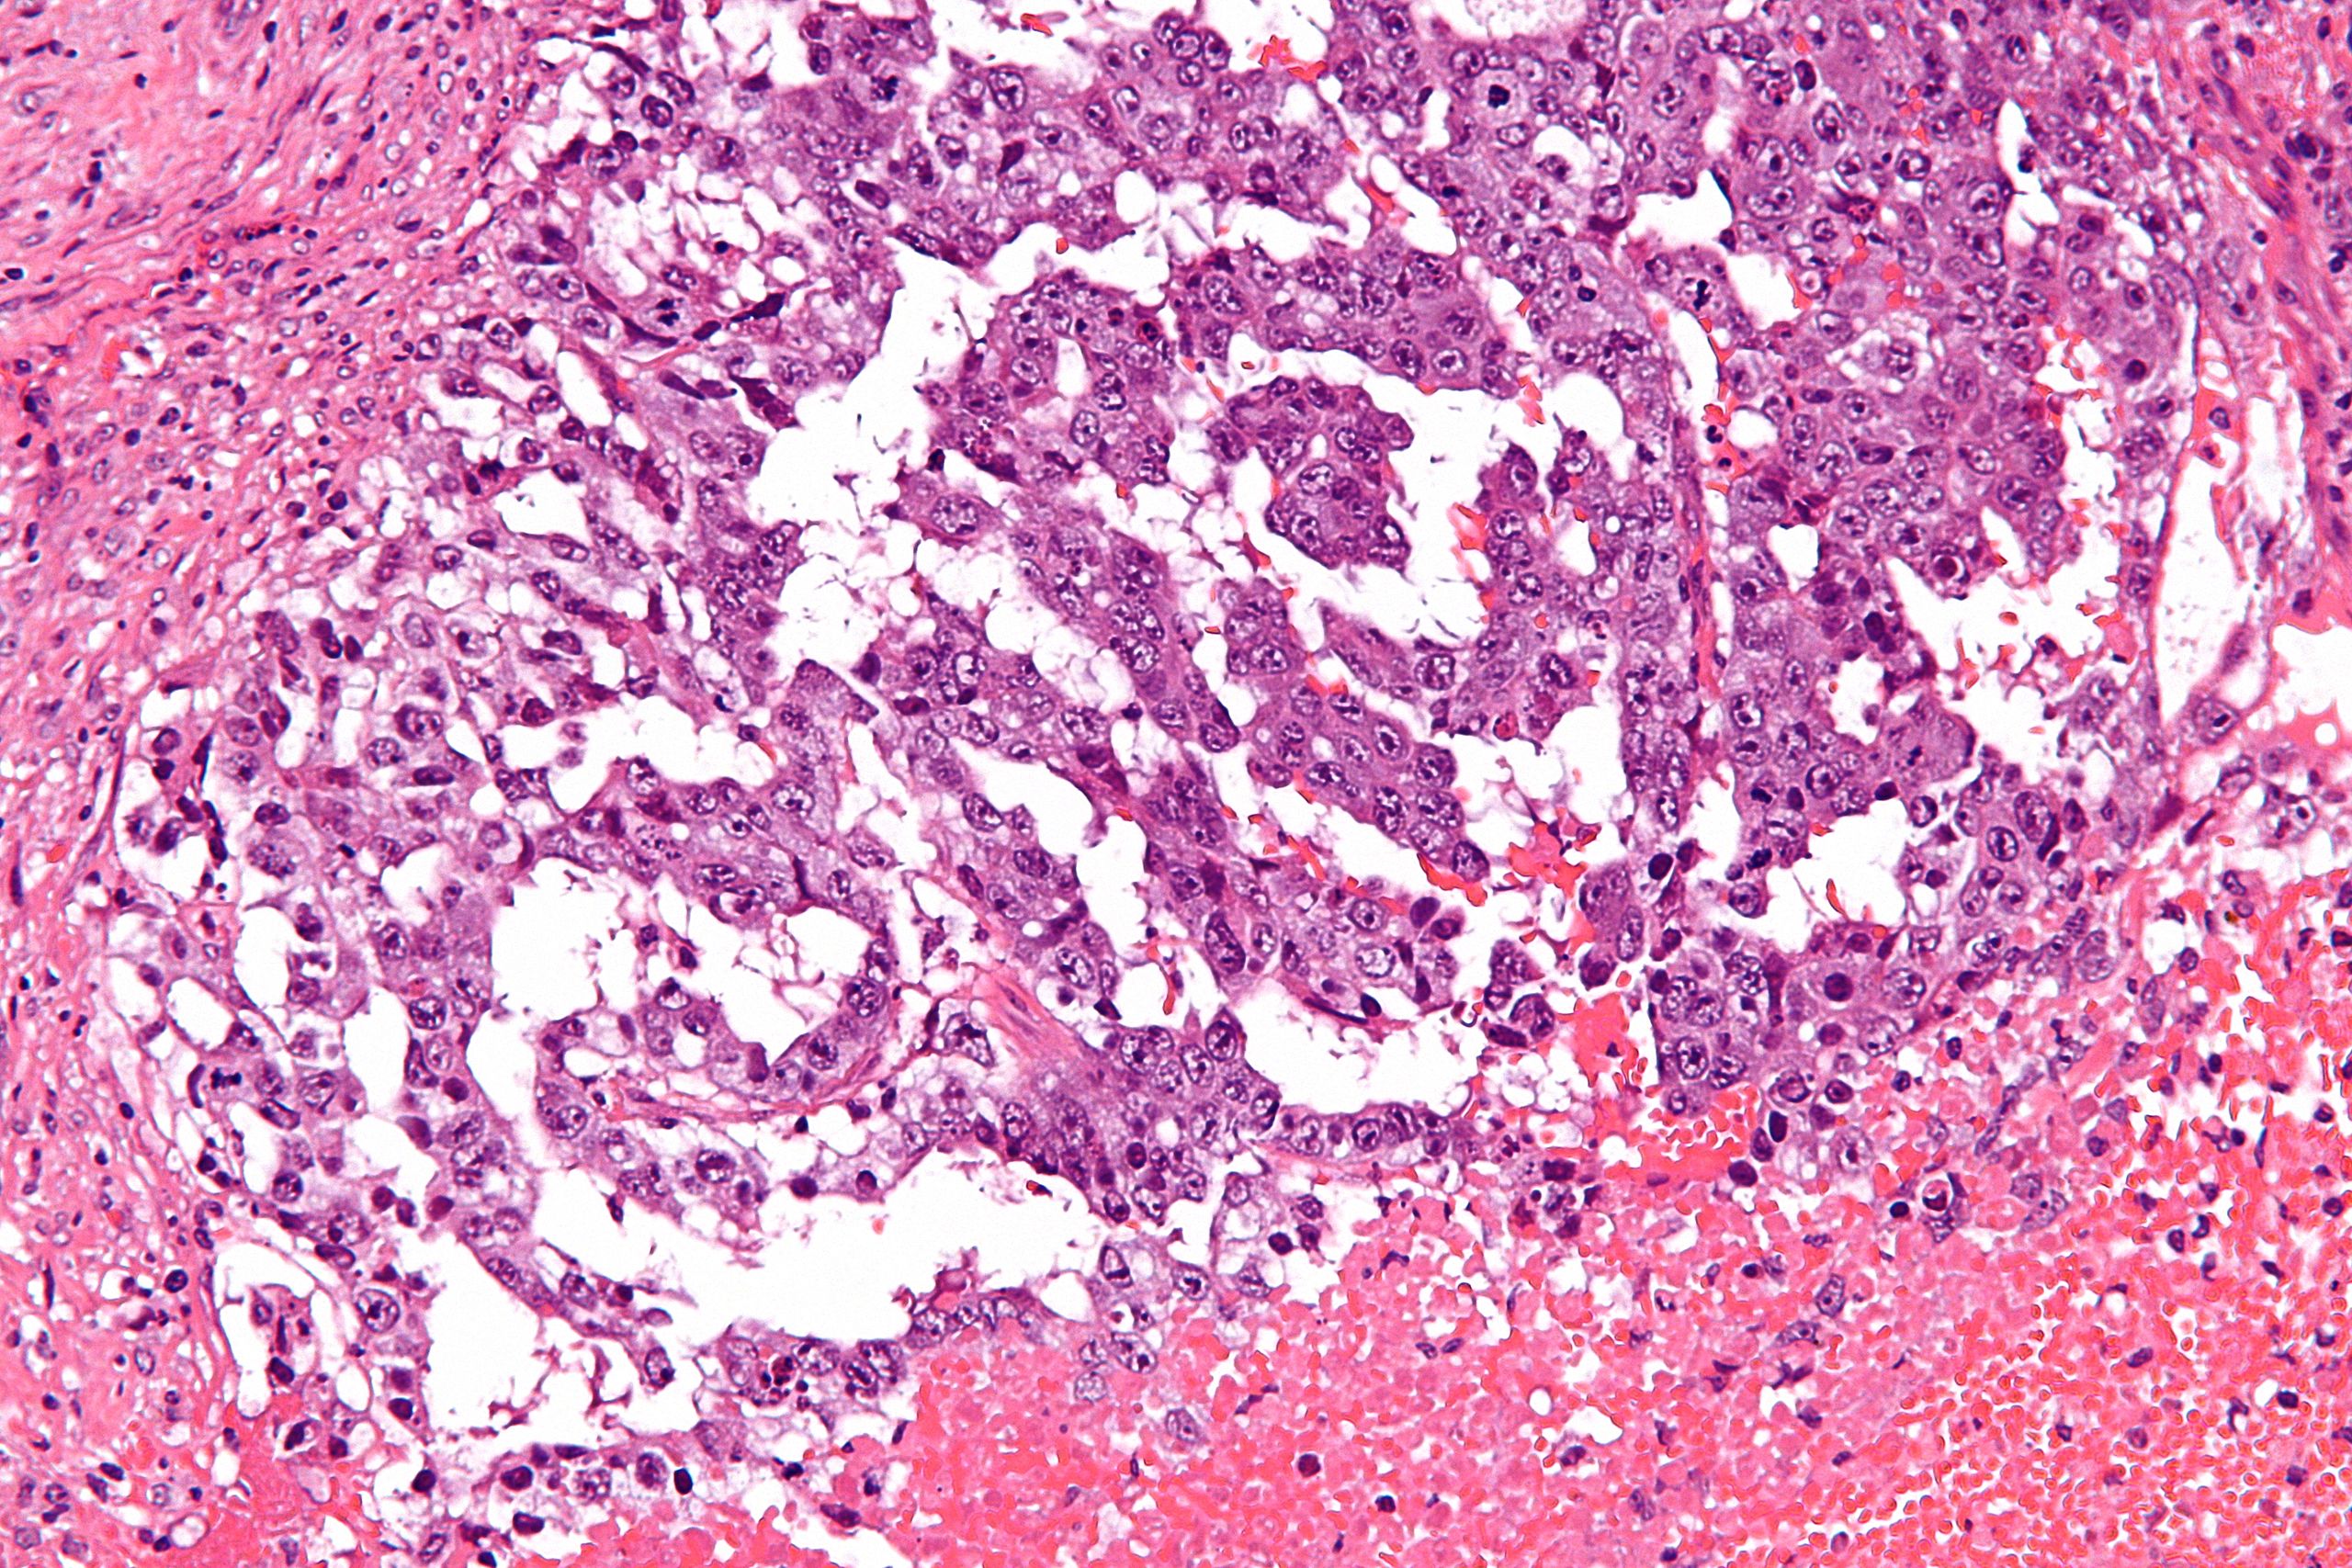 File:Mixed germ cell tumour - high mag.jpg